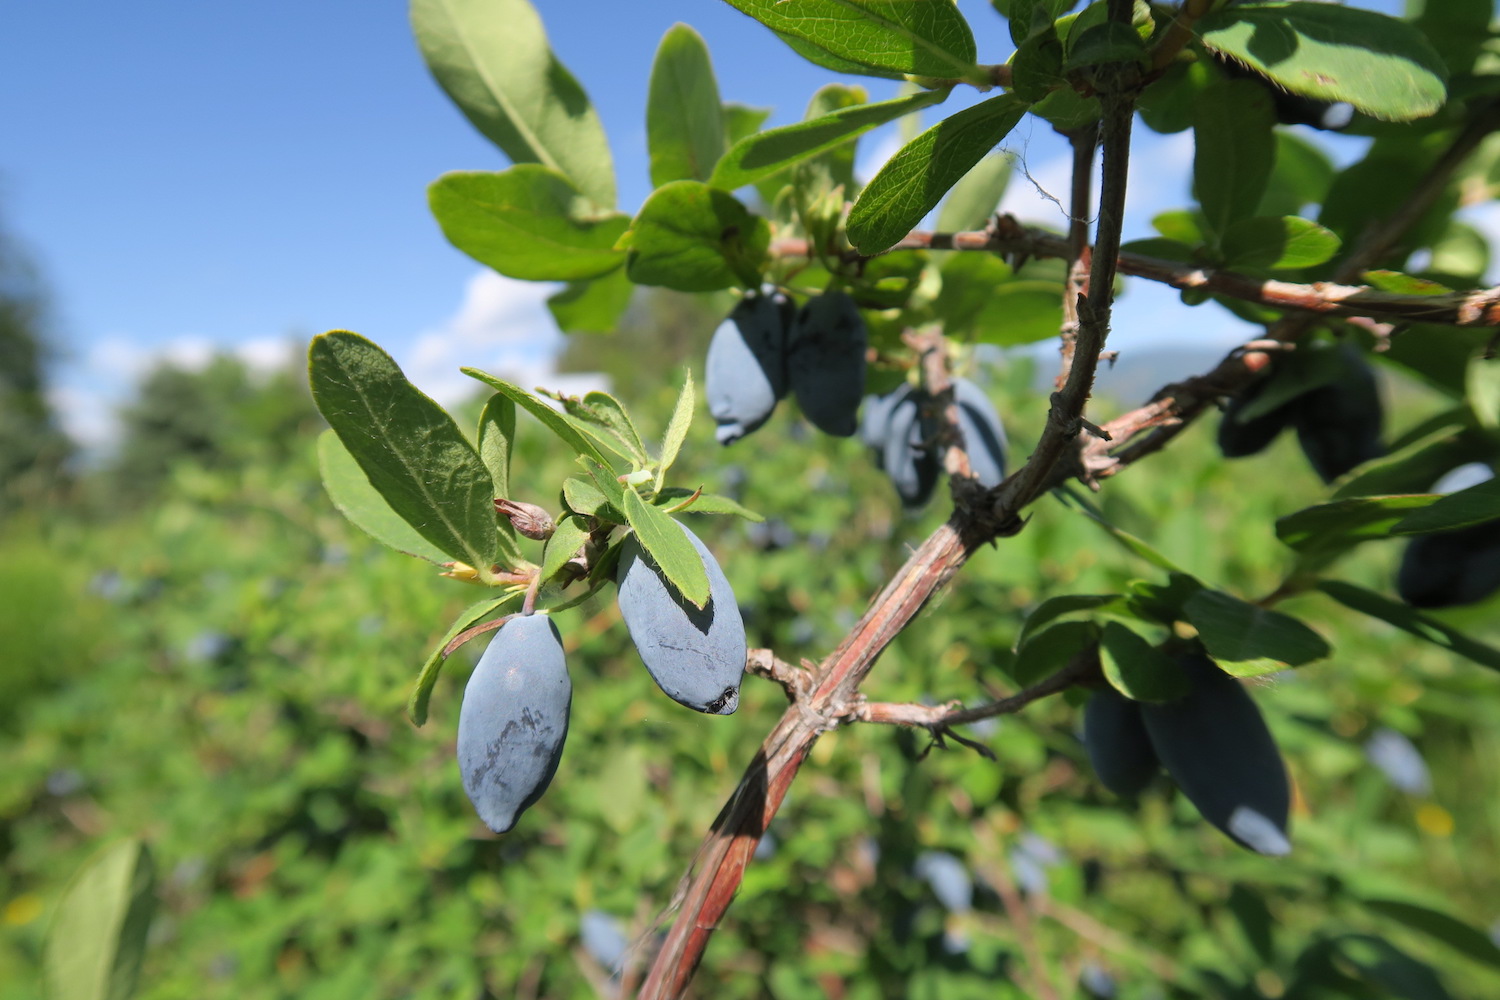 Haskap are blueberry-like berries becoming popular with gardeners and consumers alike in Idaho.